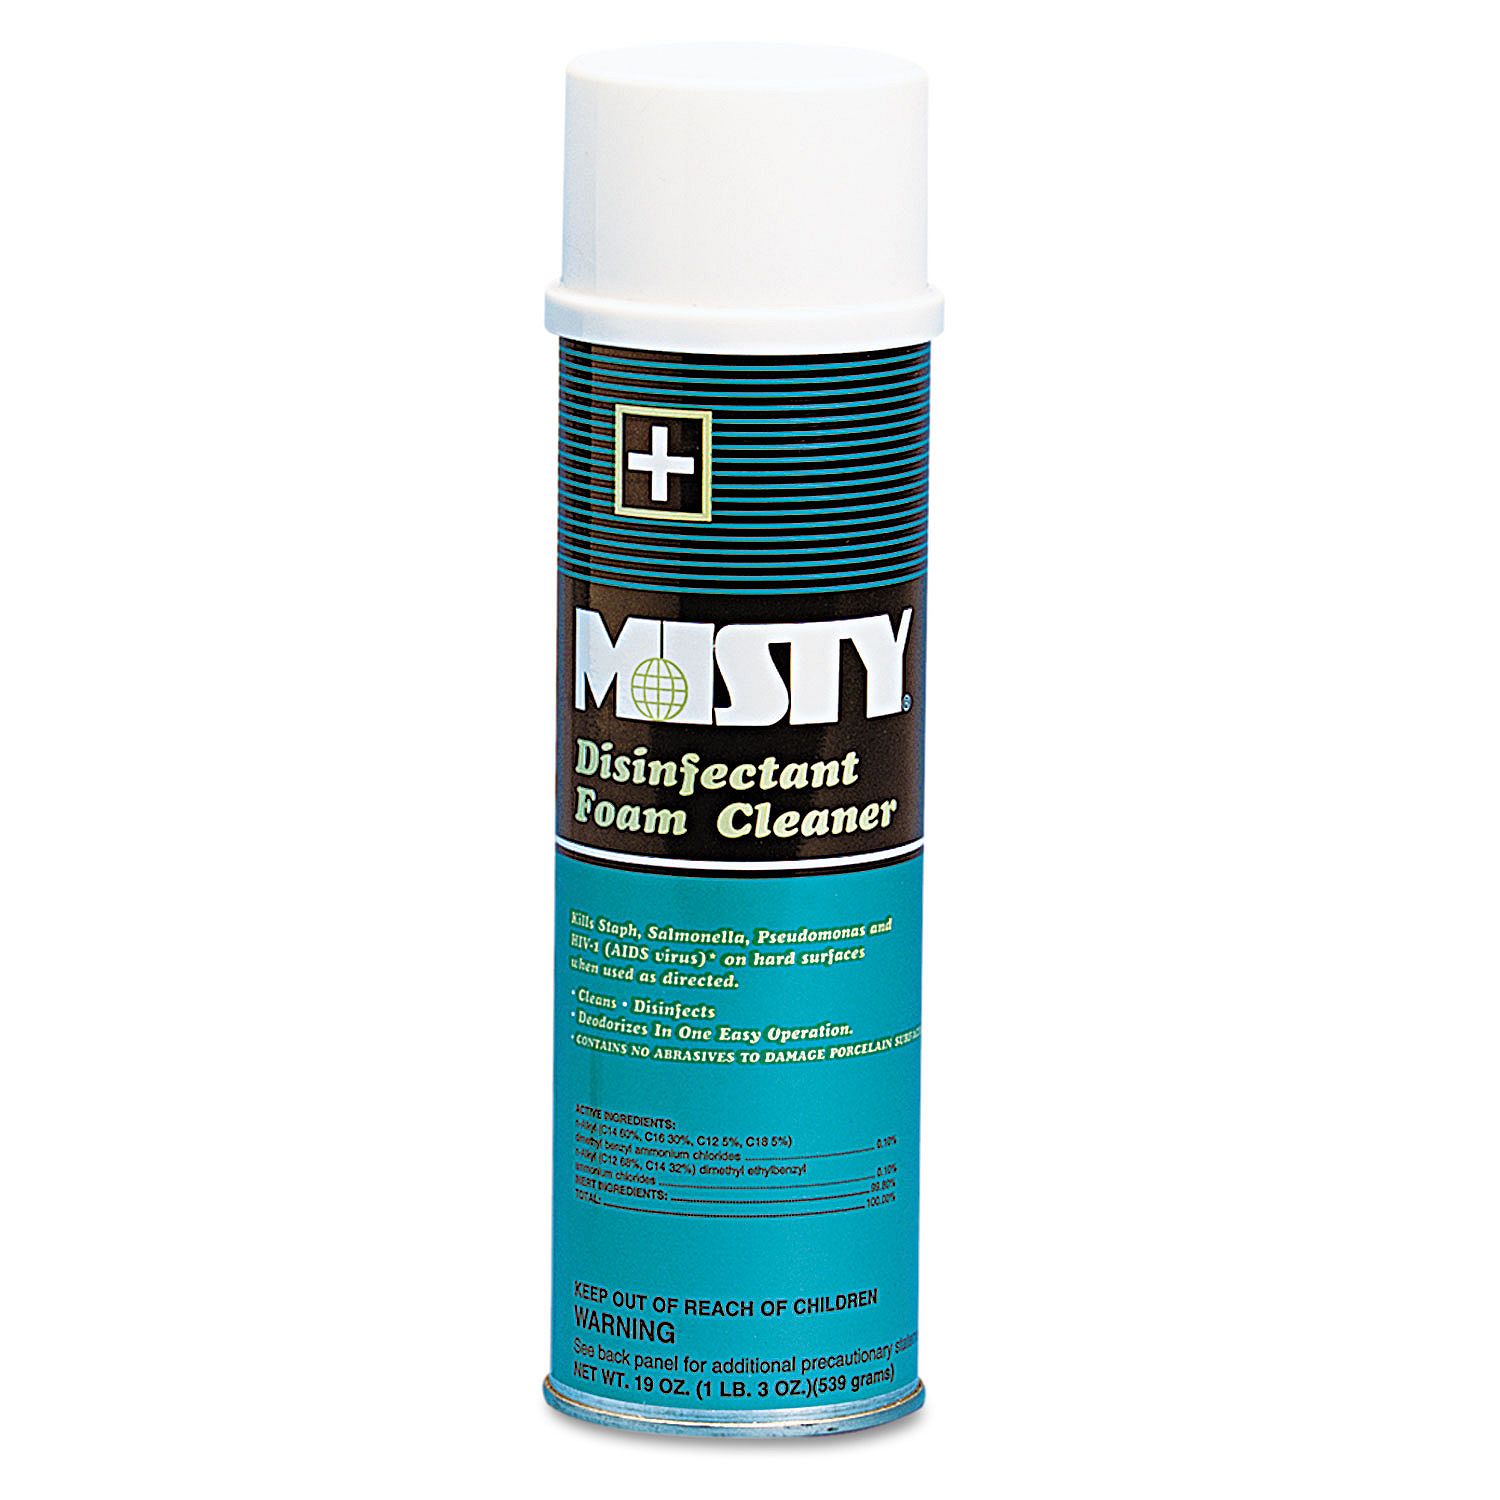 Misty Disinfectant Foam Cleaner